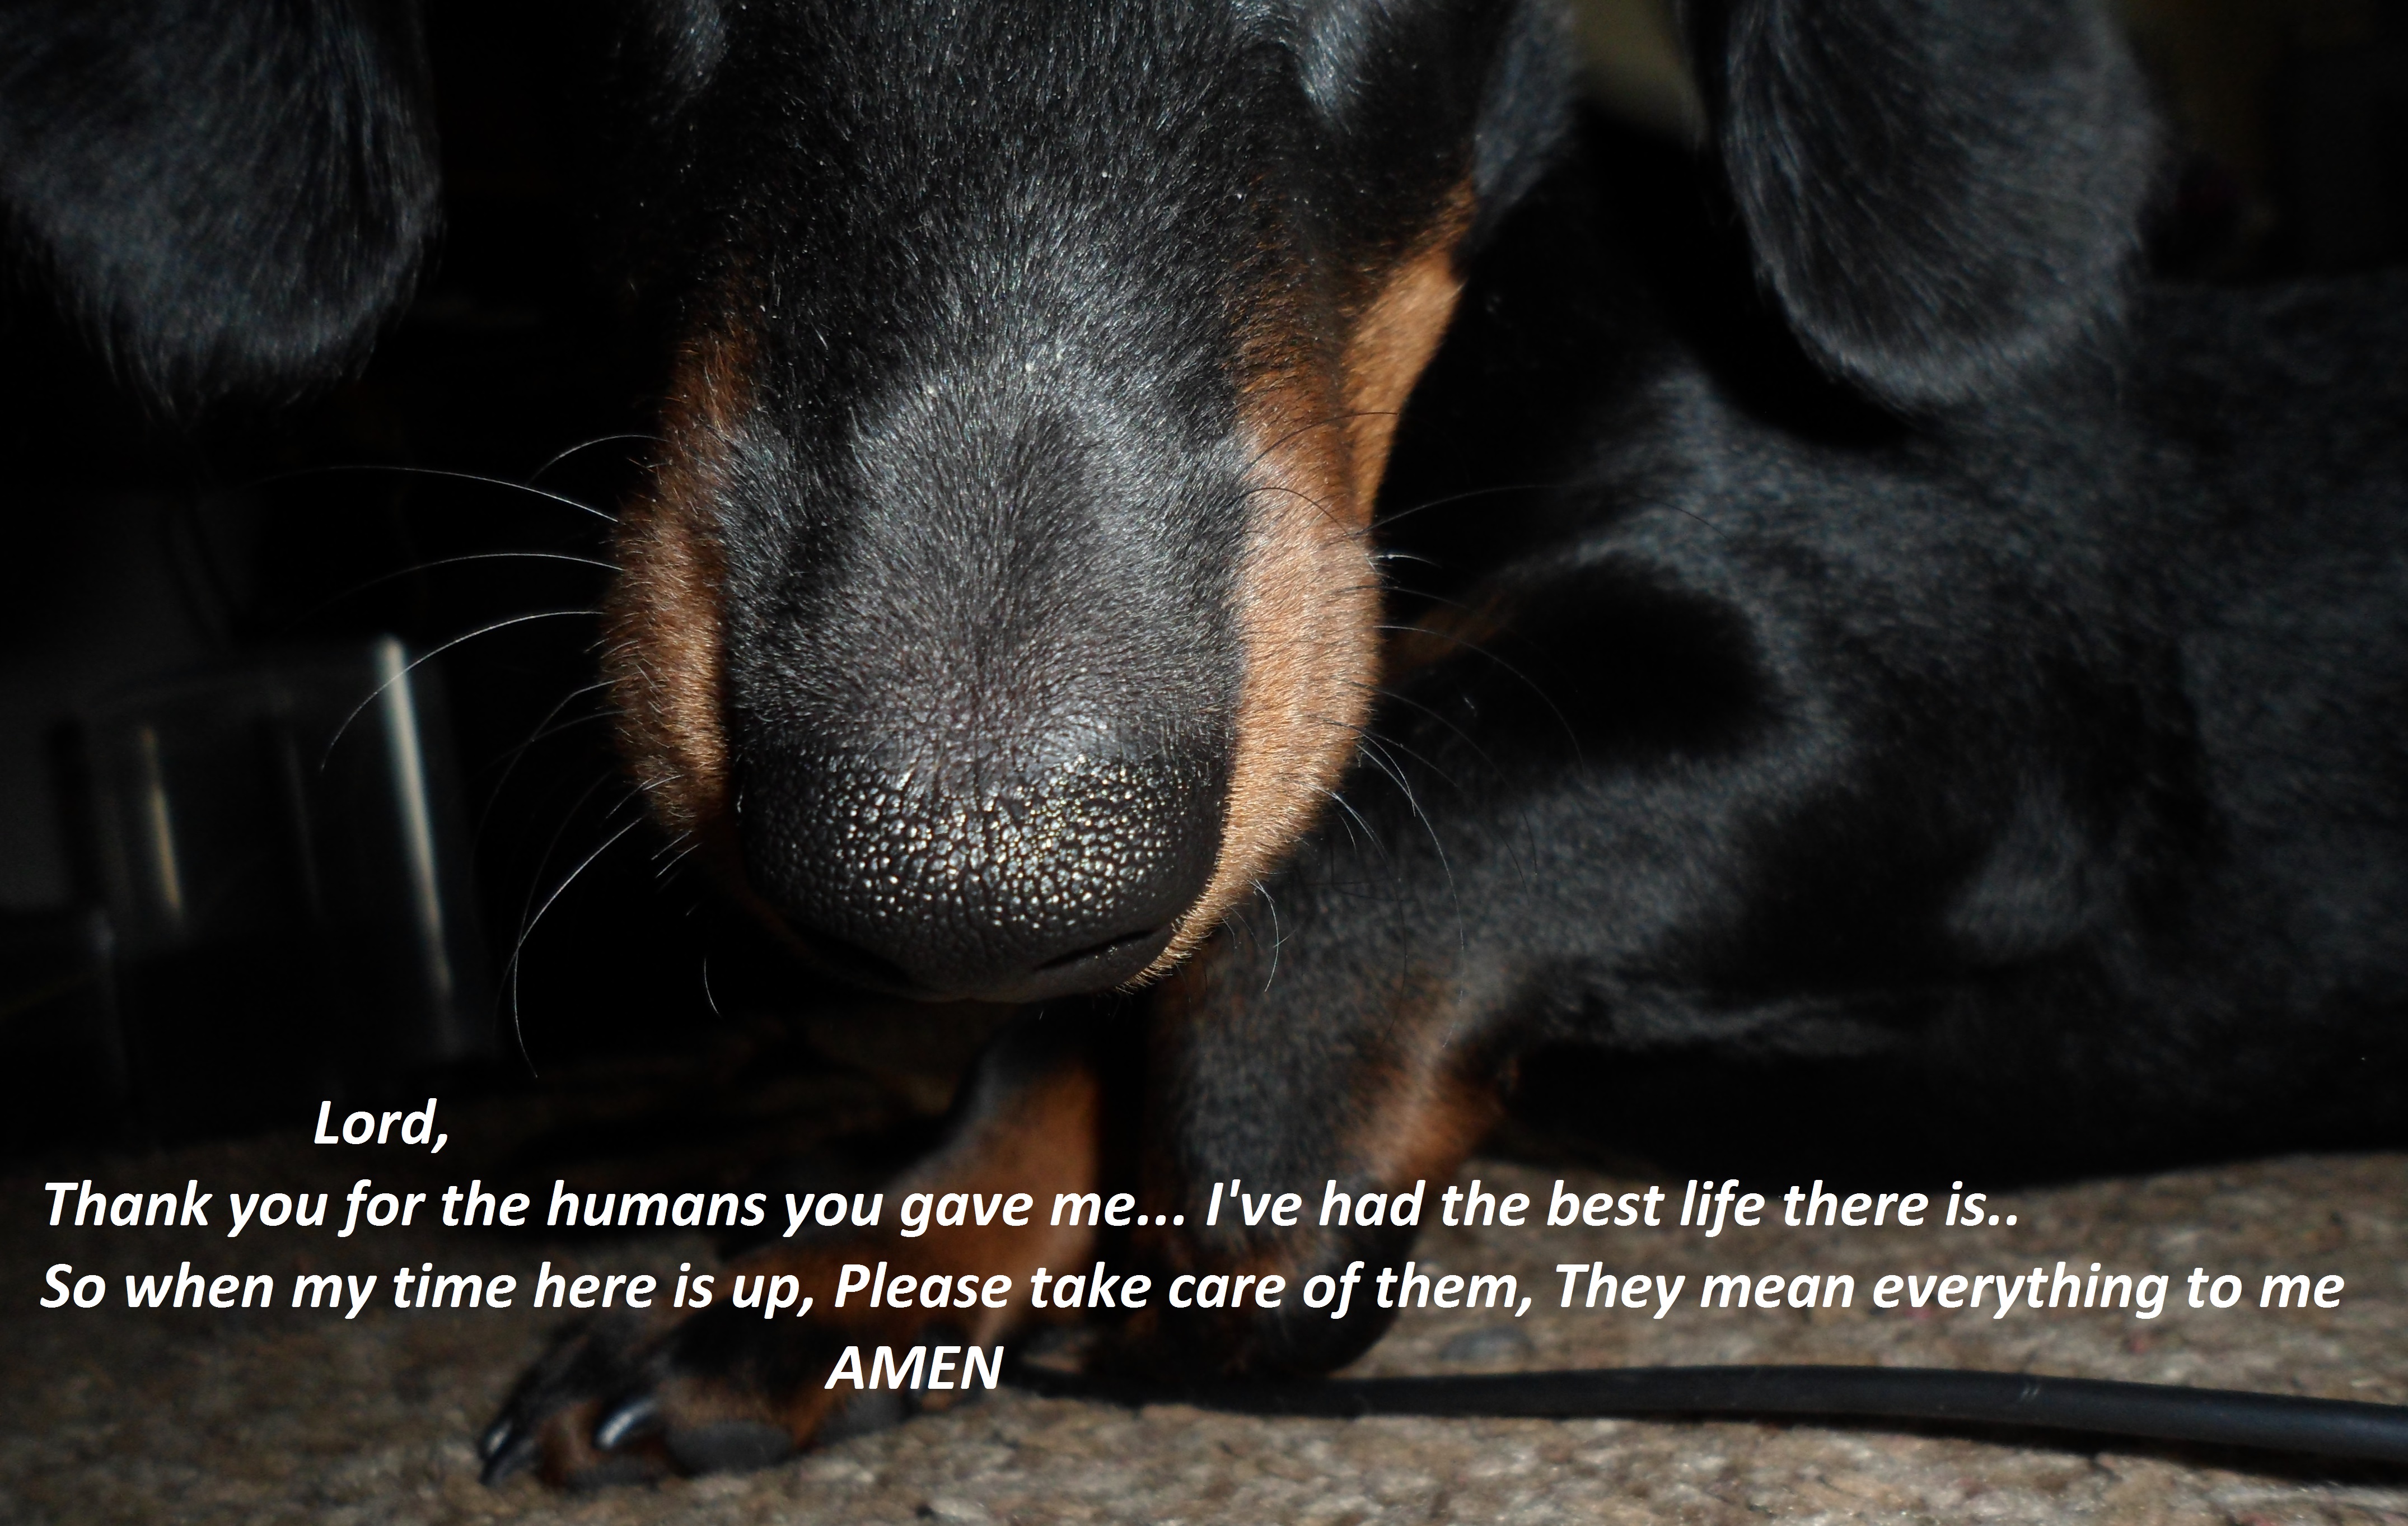 A Pets Prayer To The Lord For His Humans